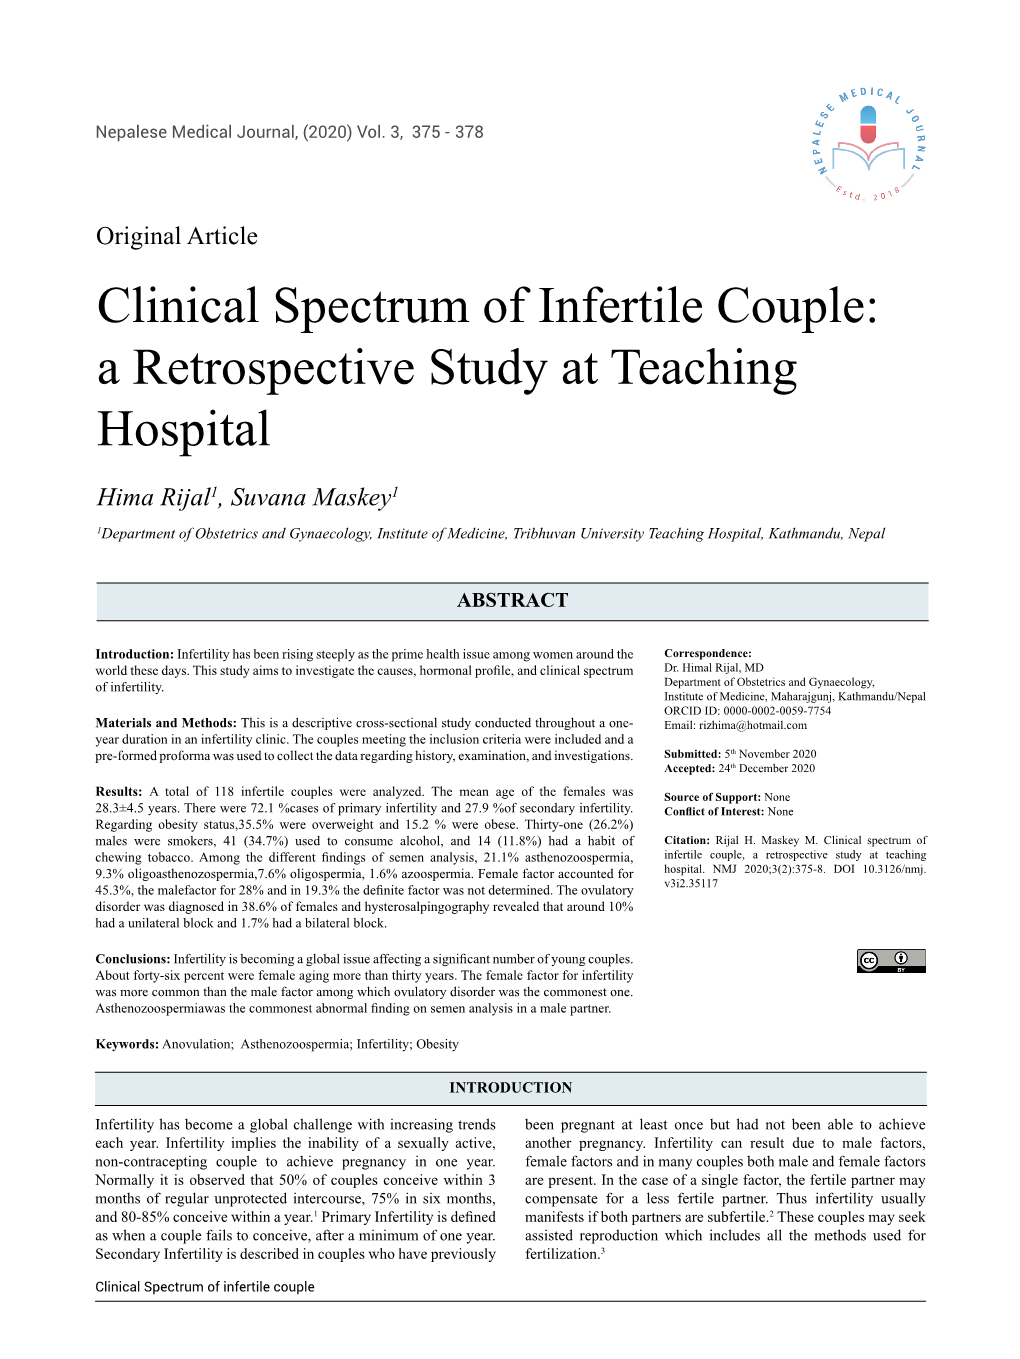 Clinical Spectrum of Infertile Couple: a Retrospective Study at Teaching Hospital